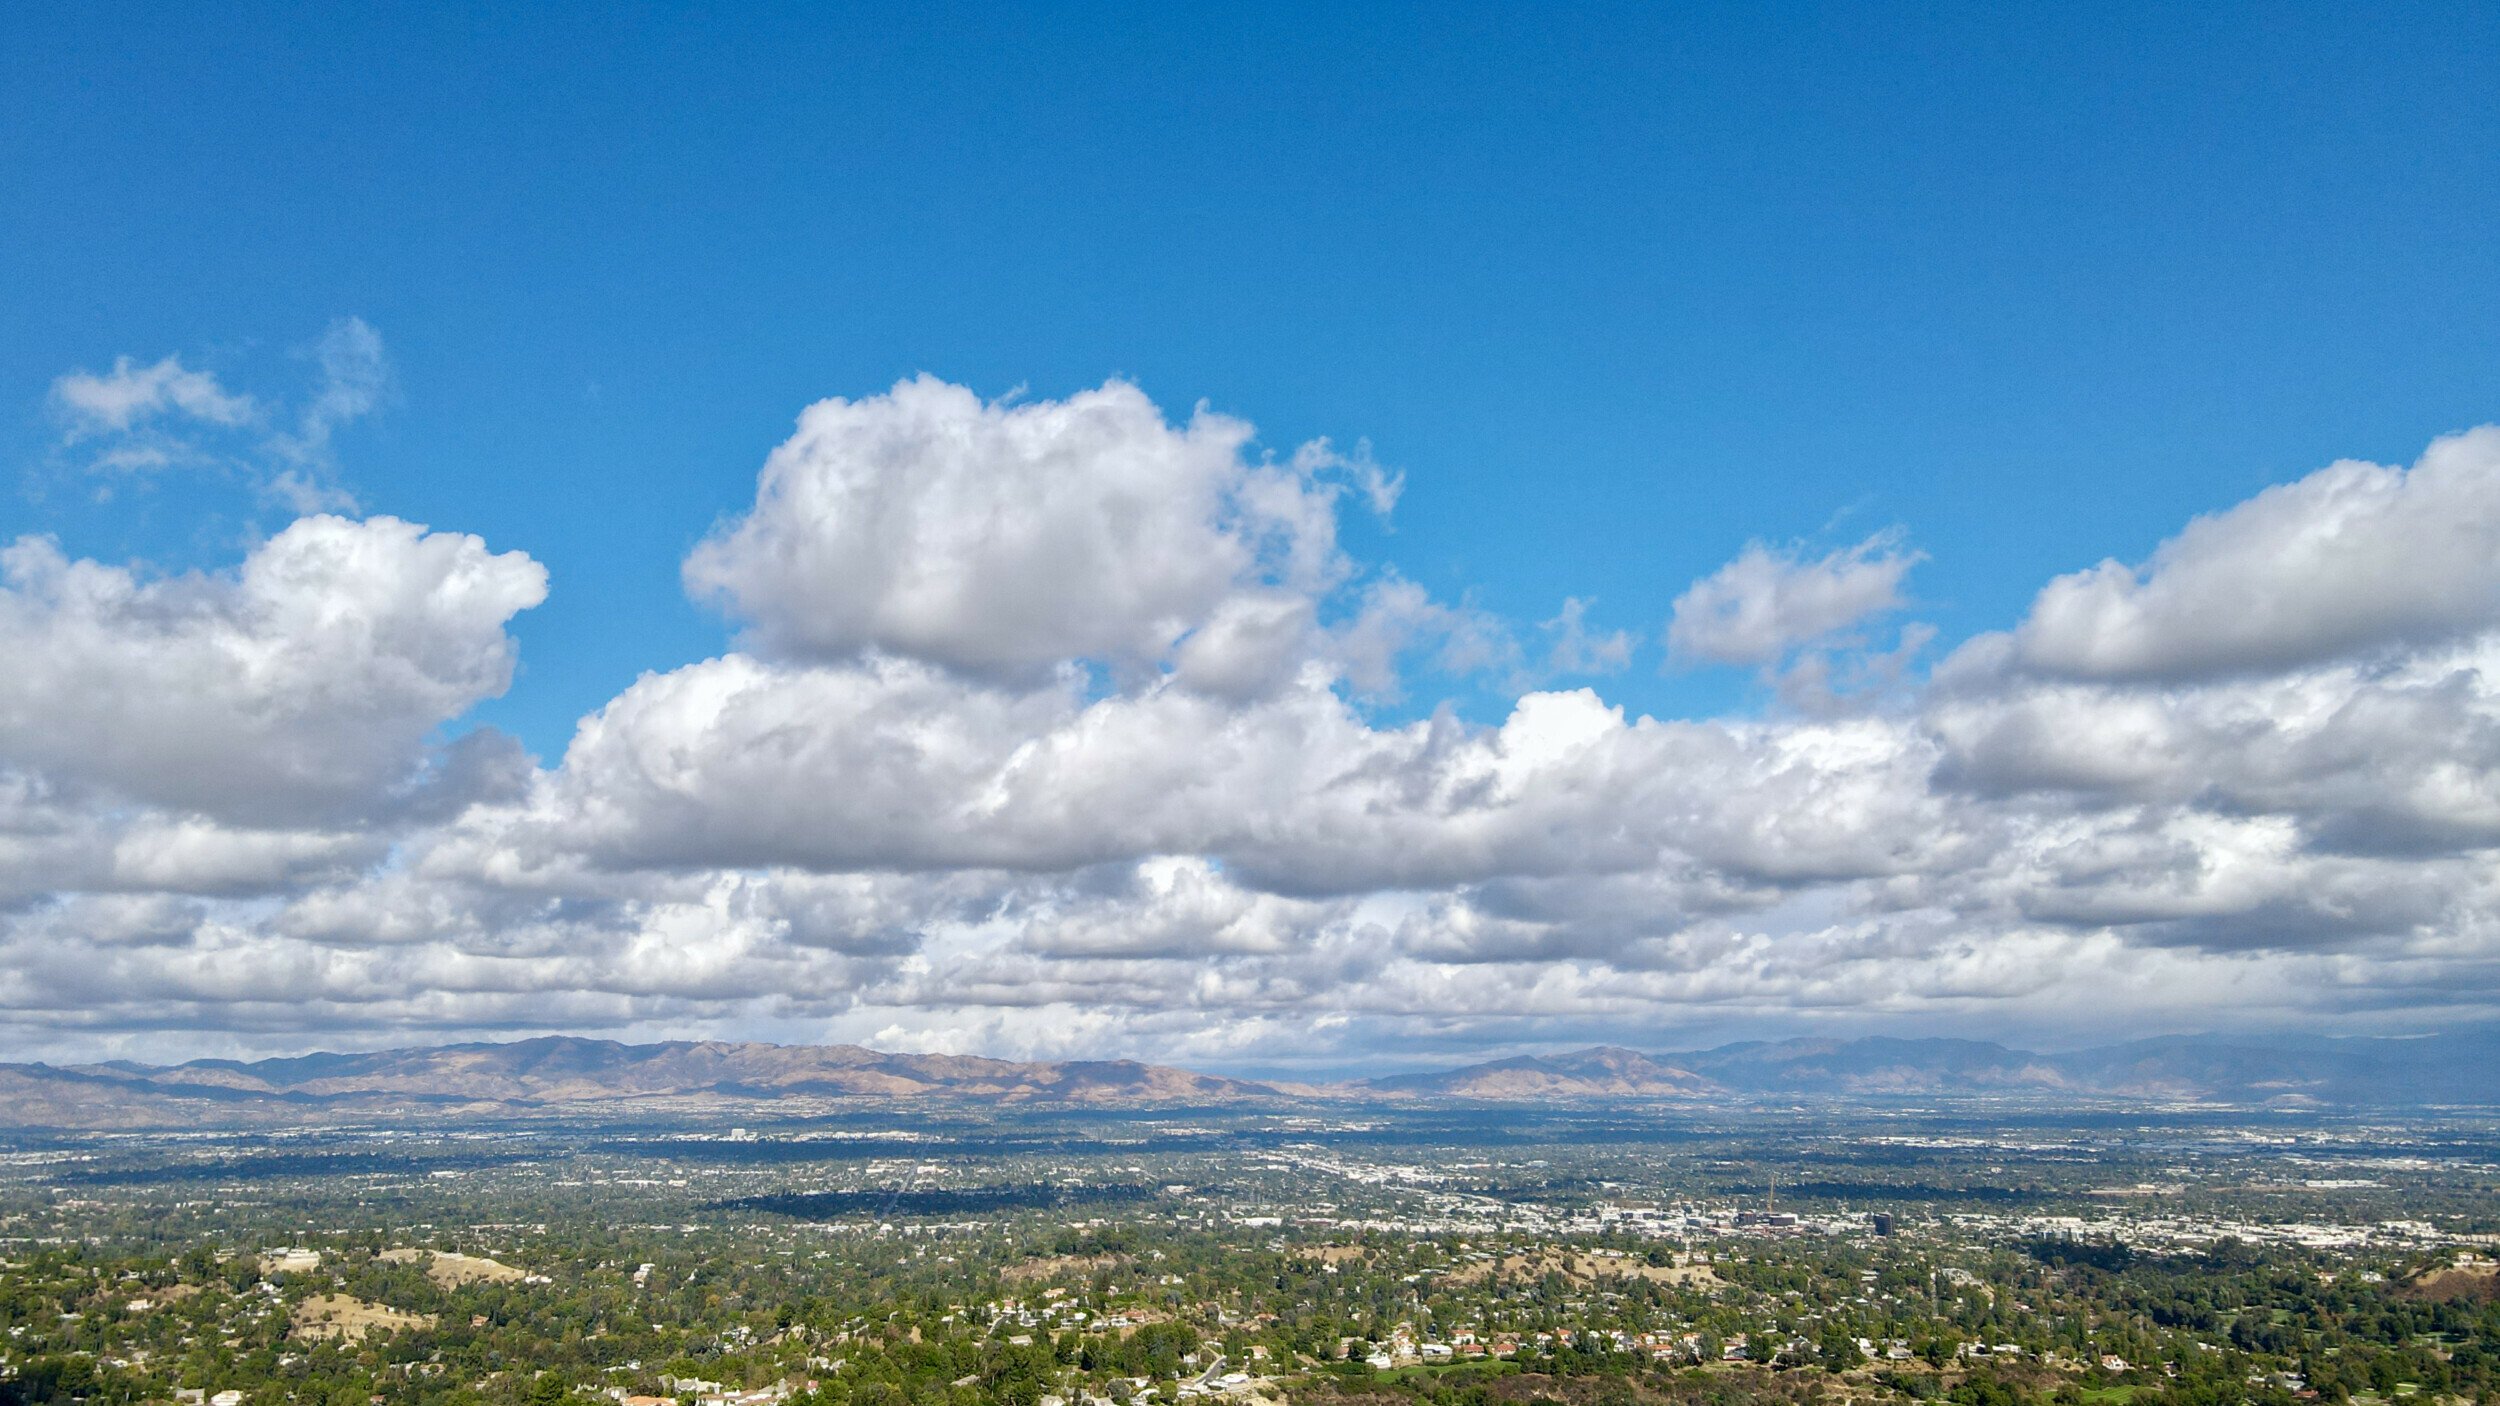 Aerial view of Marvin Braude Mulholland Park with cumulus clouds shadowing over the landscape, captured by DJI Mavic Air 2